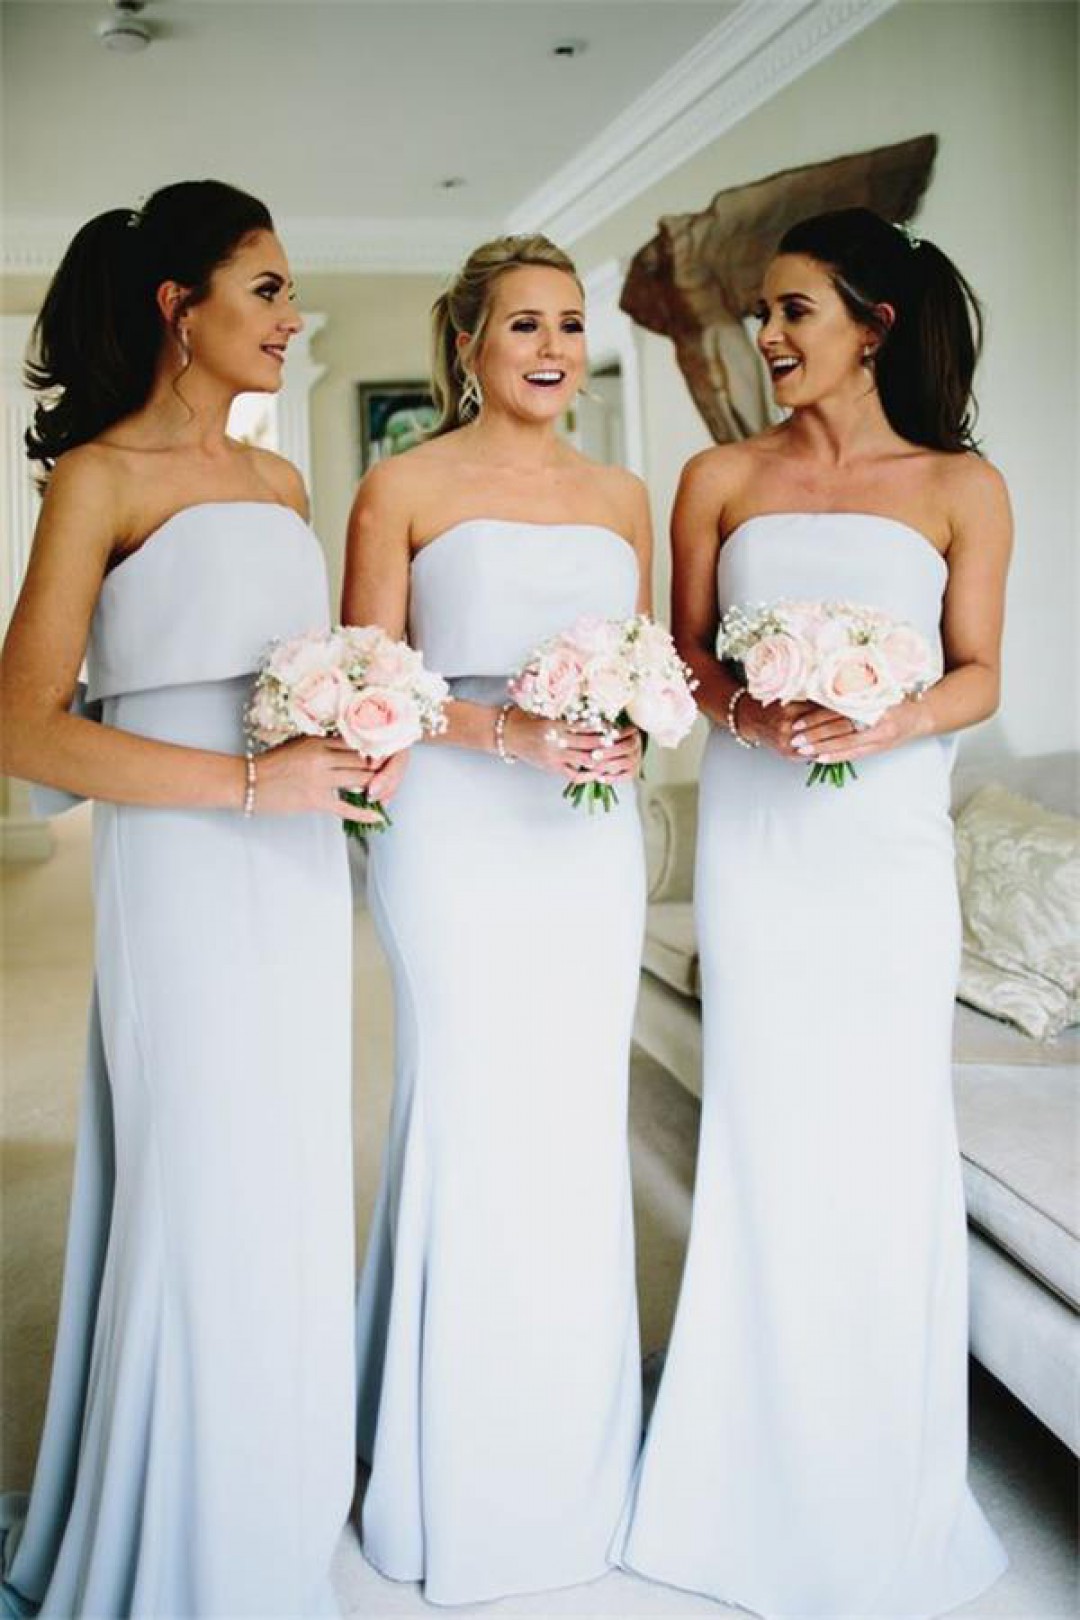 gown designs for wedding guests